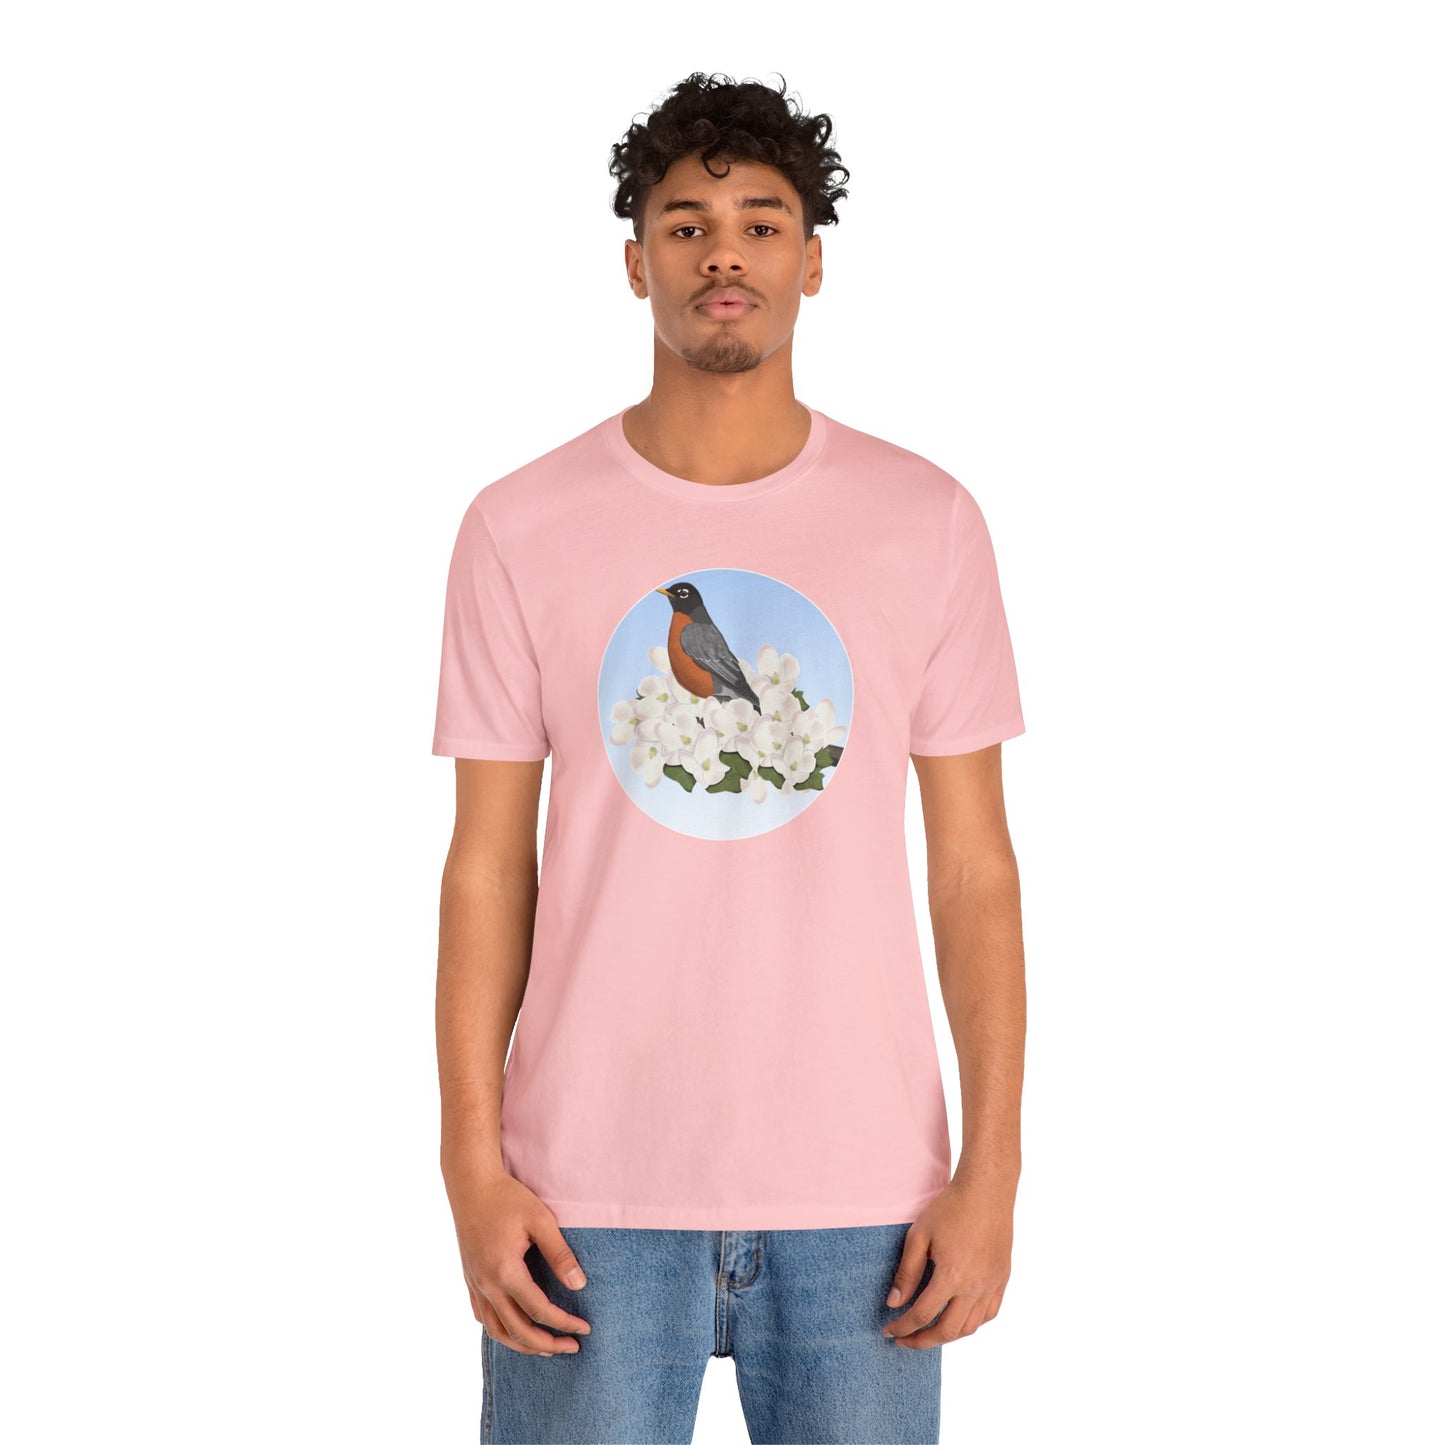 American Robin and Spring Apple Blossoms Bird T-Shirt